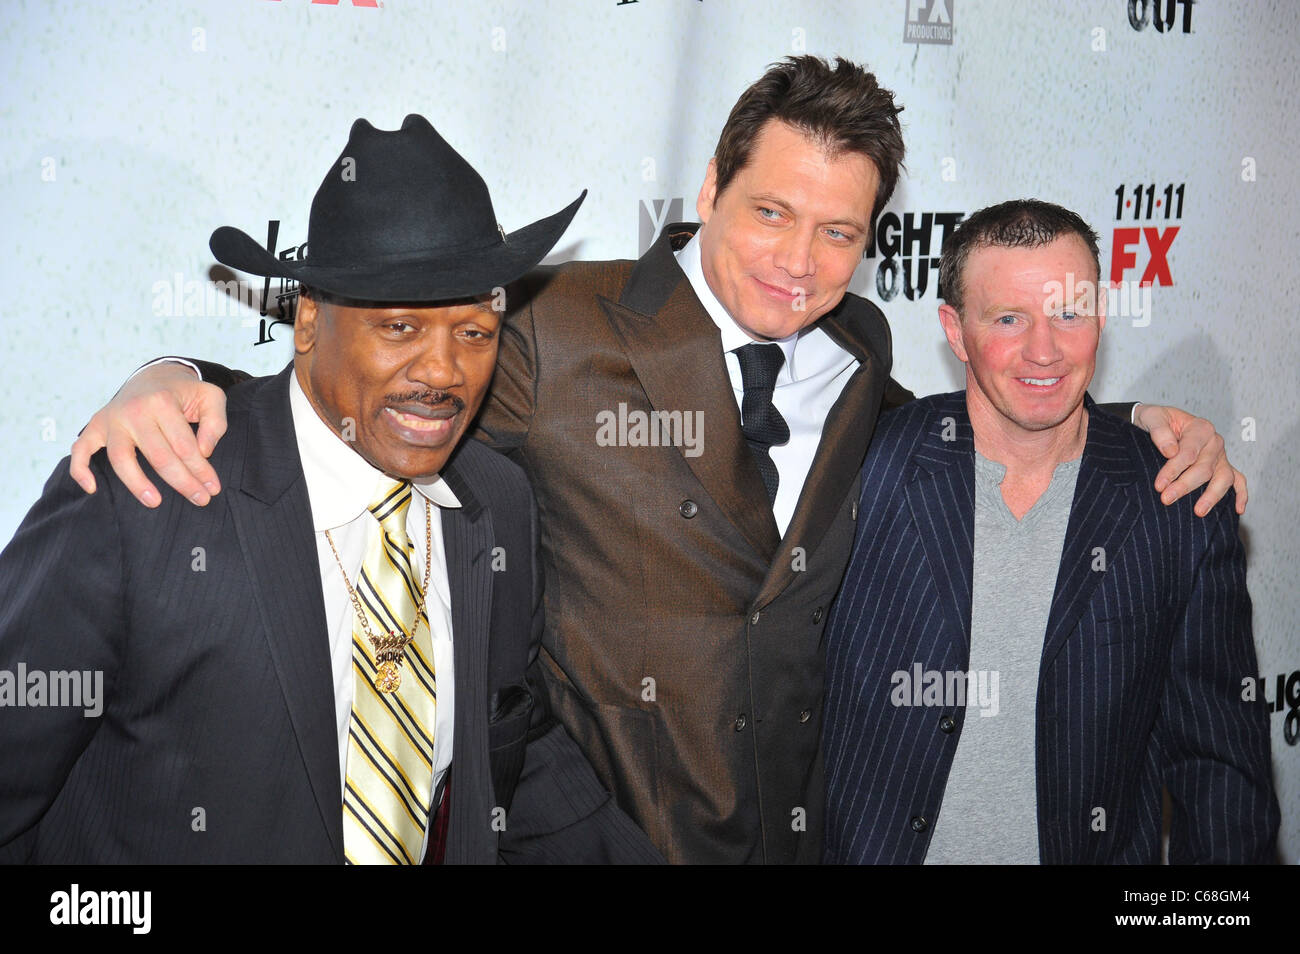 Joe Frazier, Holt McCallany, Micky Ward at arrivals for LIGHTS OUT Series Premiere on FX, Hudson Theater, New York, NY January 5, 2011. Photo By: Gregorio T. Binuya/Everett Collection Stock Photo